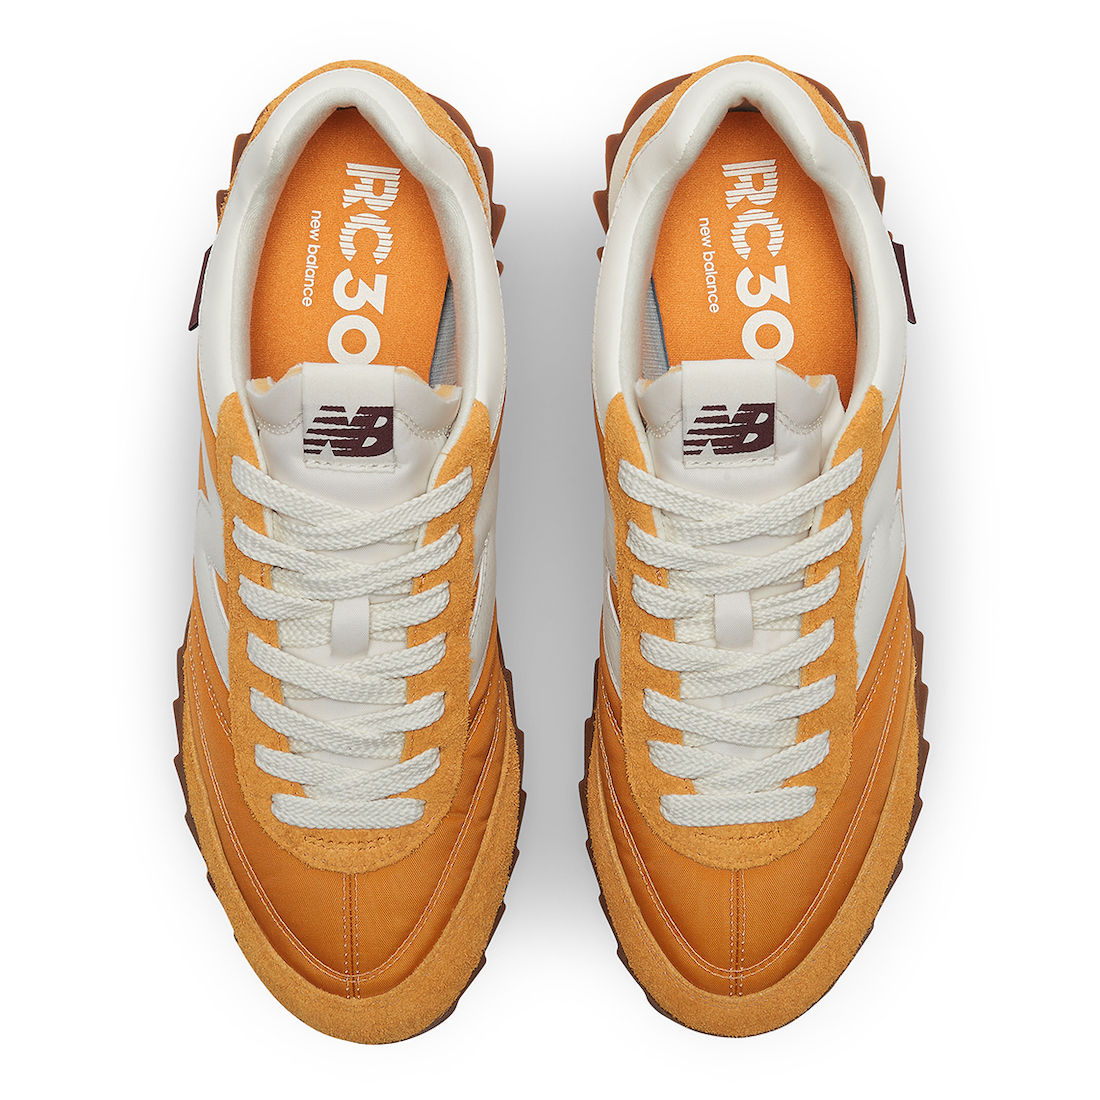 Donald Glover where to buy the SNS New Balance 574 Golden Hour URC30GG nis Date Price